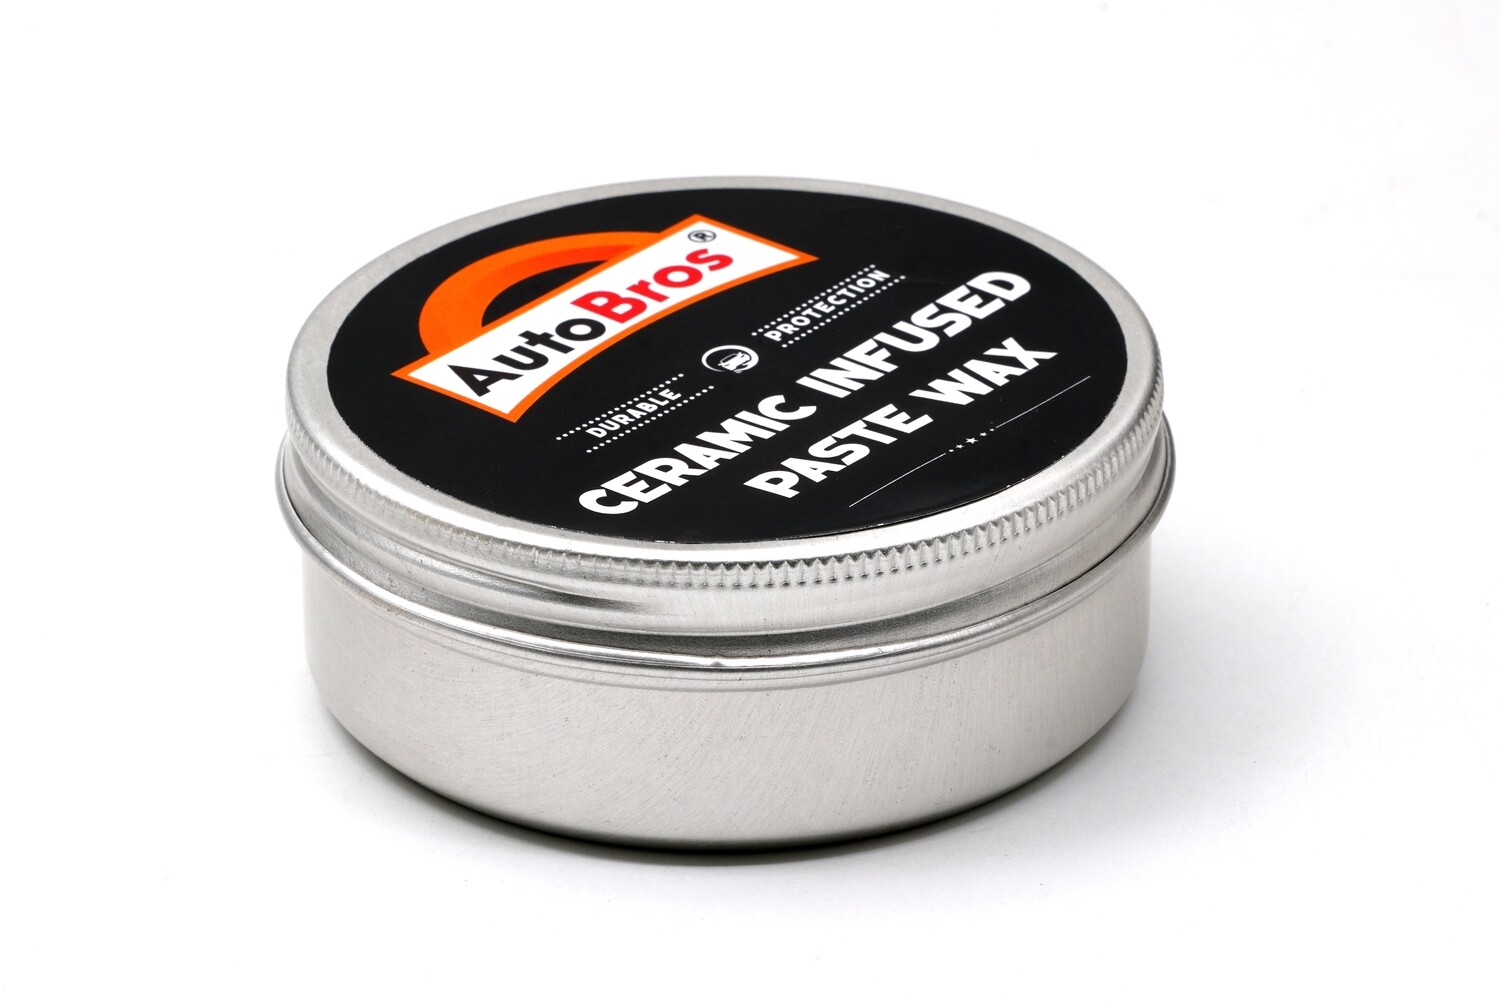 Ceramic Infused Paste Wax : High Gloss, Water Beading Wax with Power of SiO2